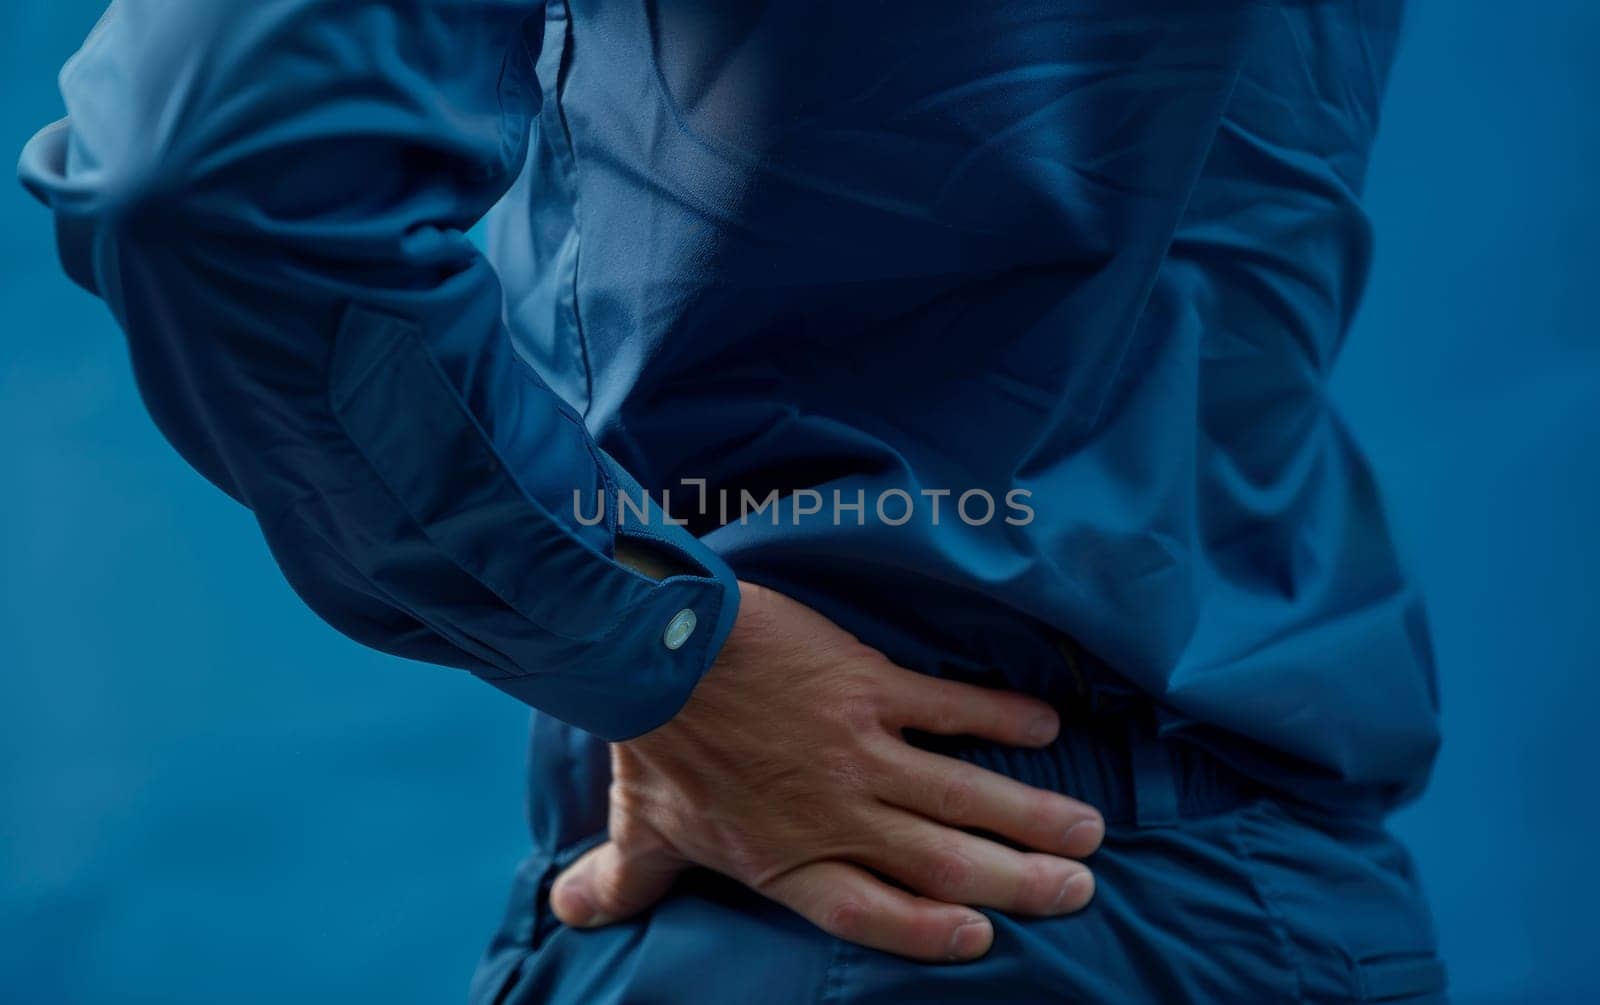 A figure in blue is shown gripping their lower back in pain. The stark blue tone adds an intense, clinical feel to the concept of backache. by sfinks